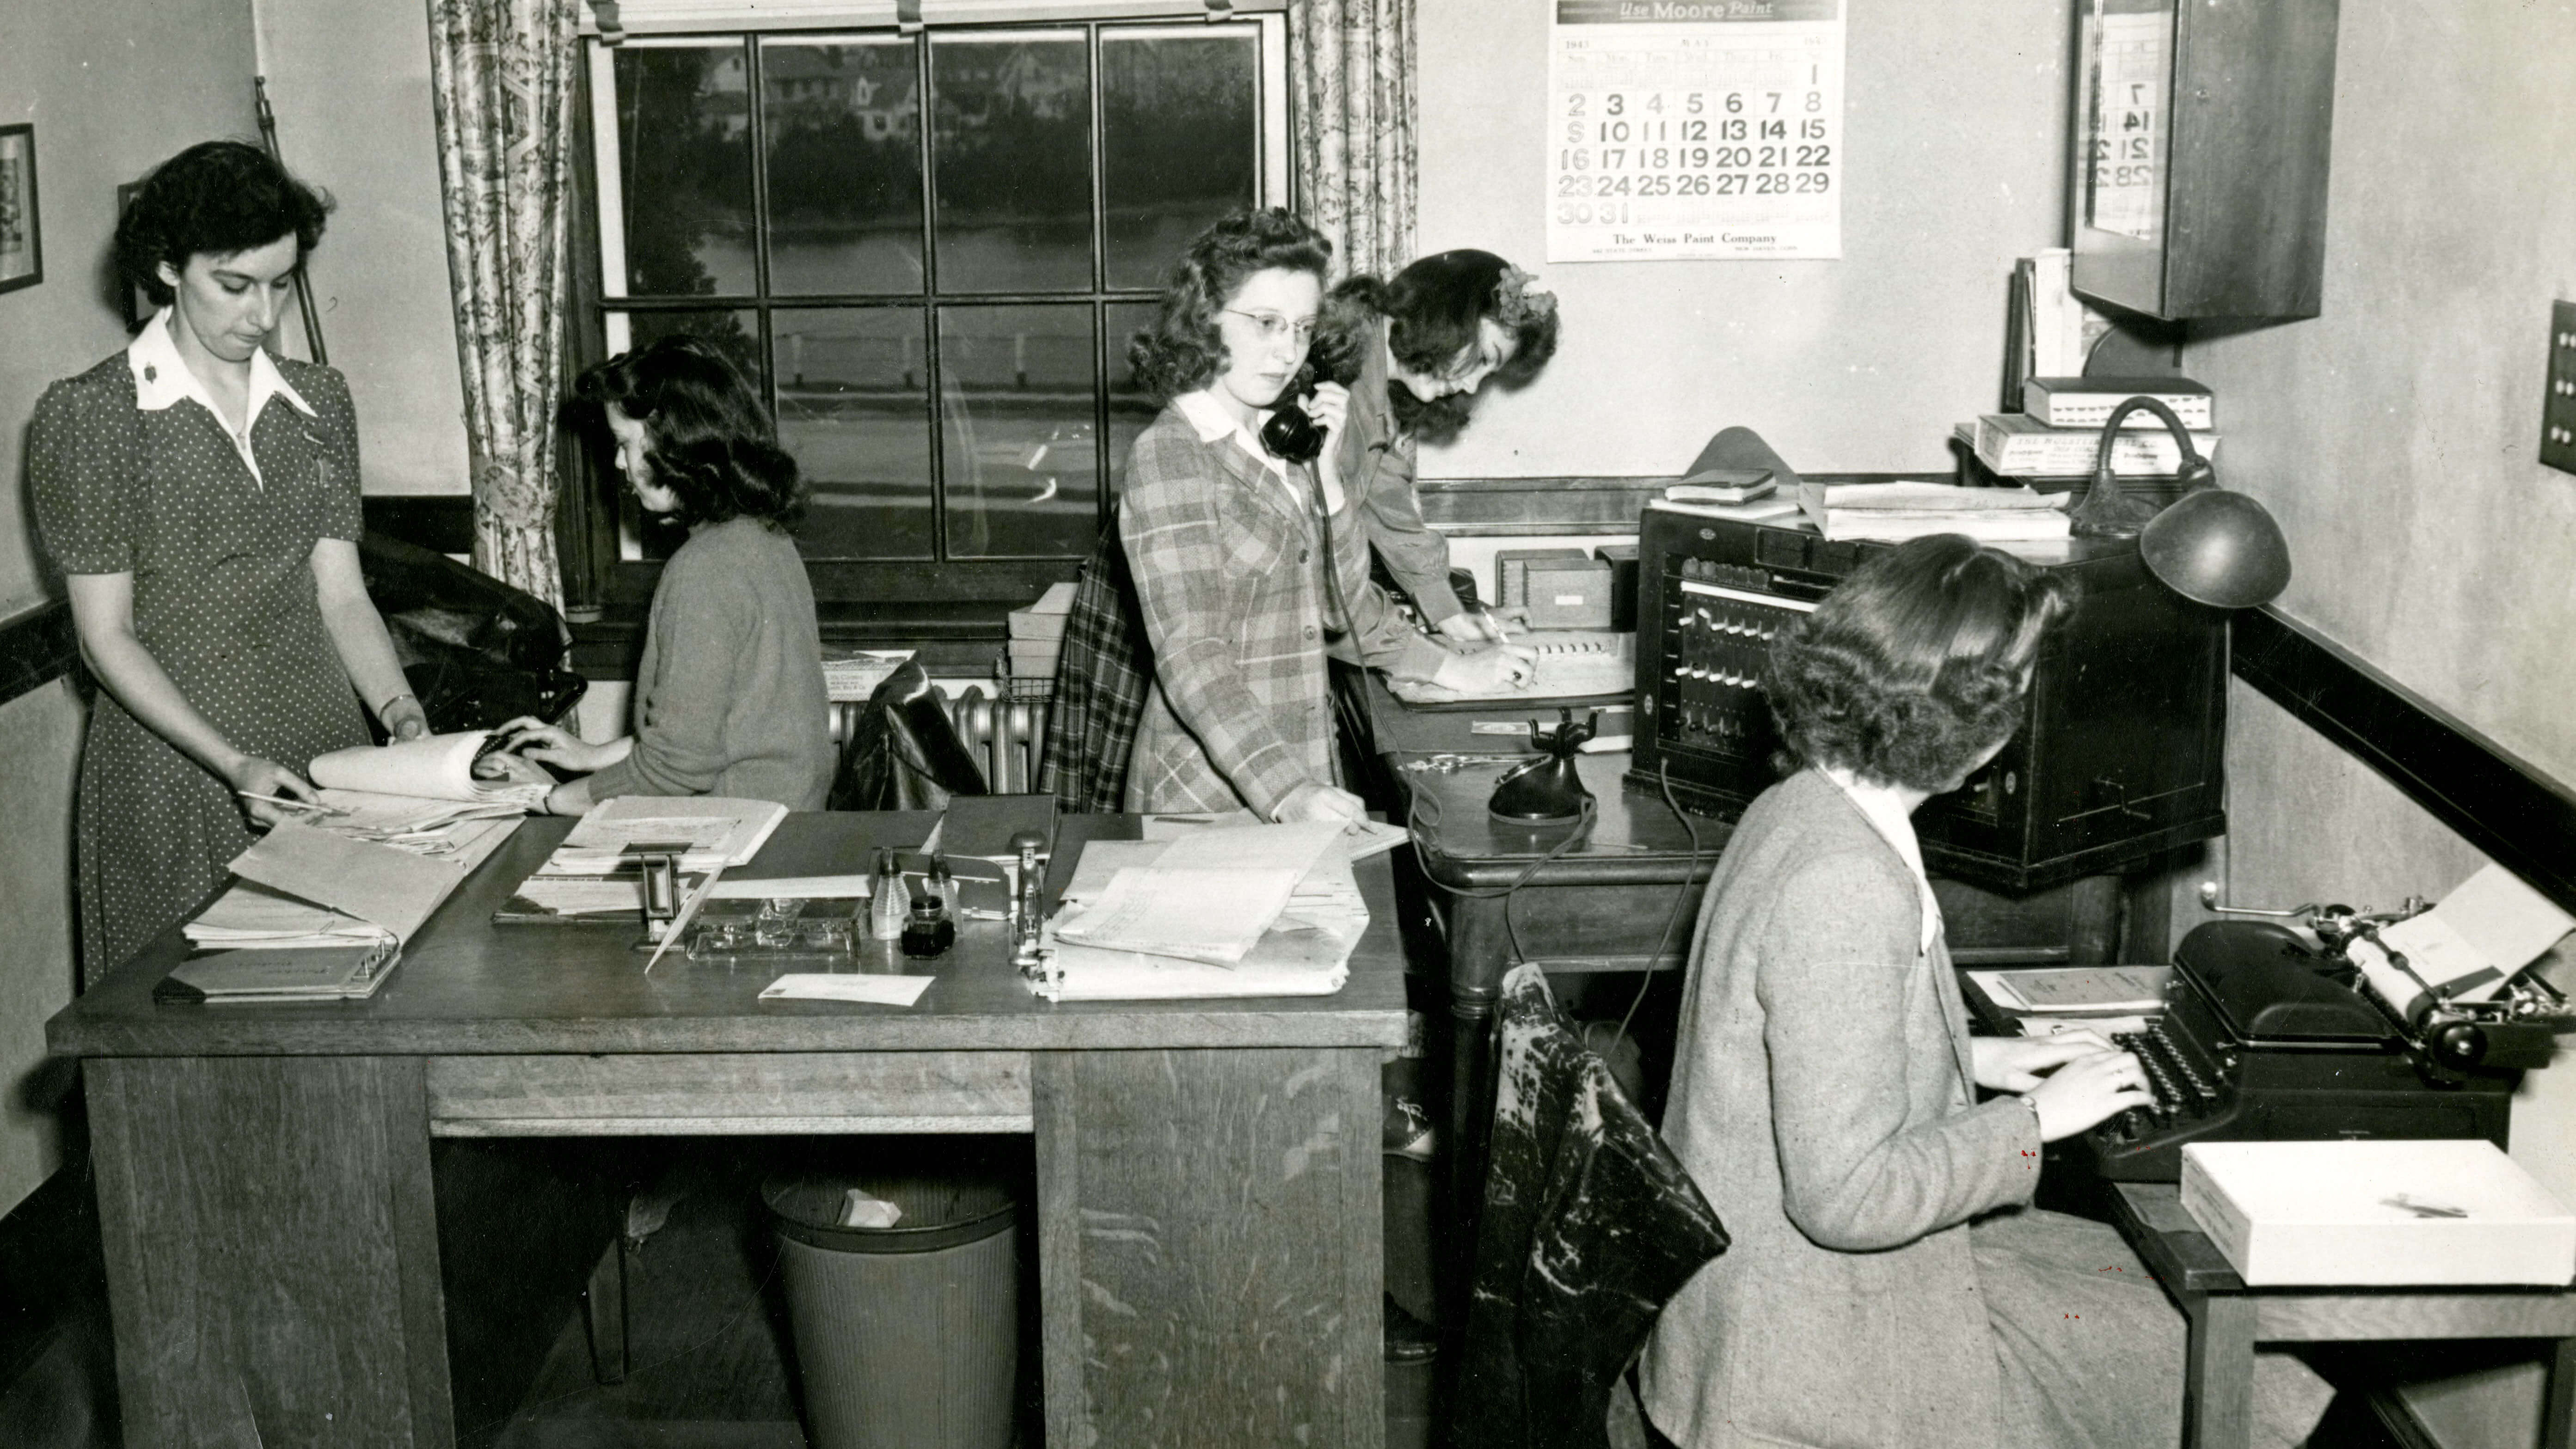 A group of women working at desks with papers and typewriters